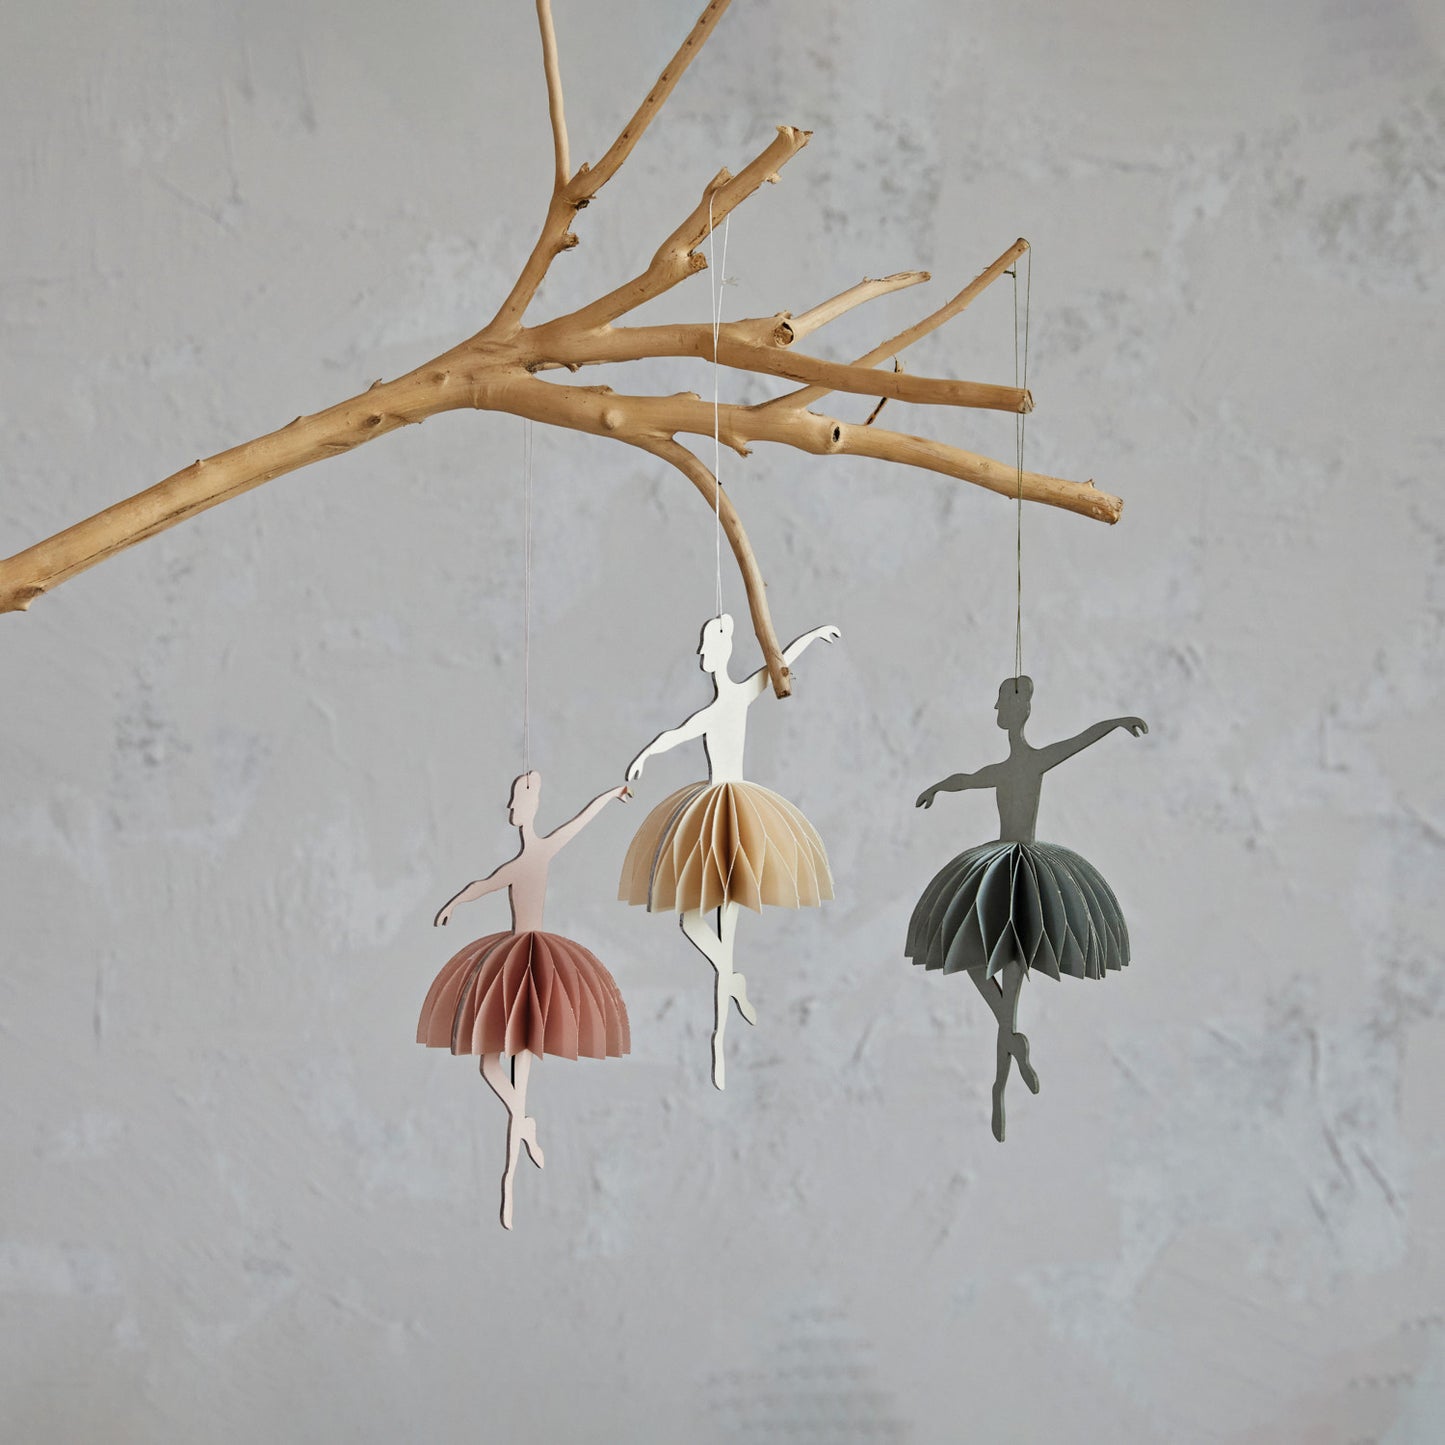 8"H Handmade Recycled Paper Folding Honeycomb Ballerina Ornament, 3 Colors